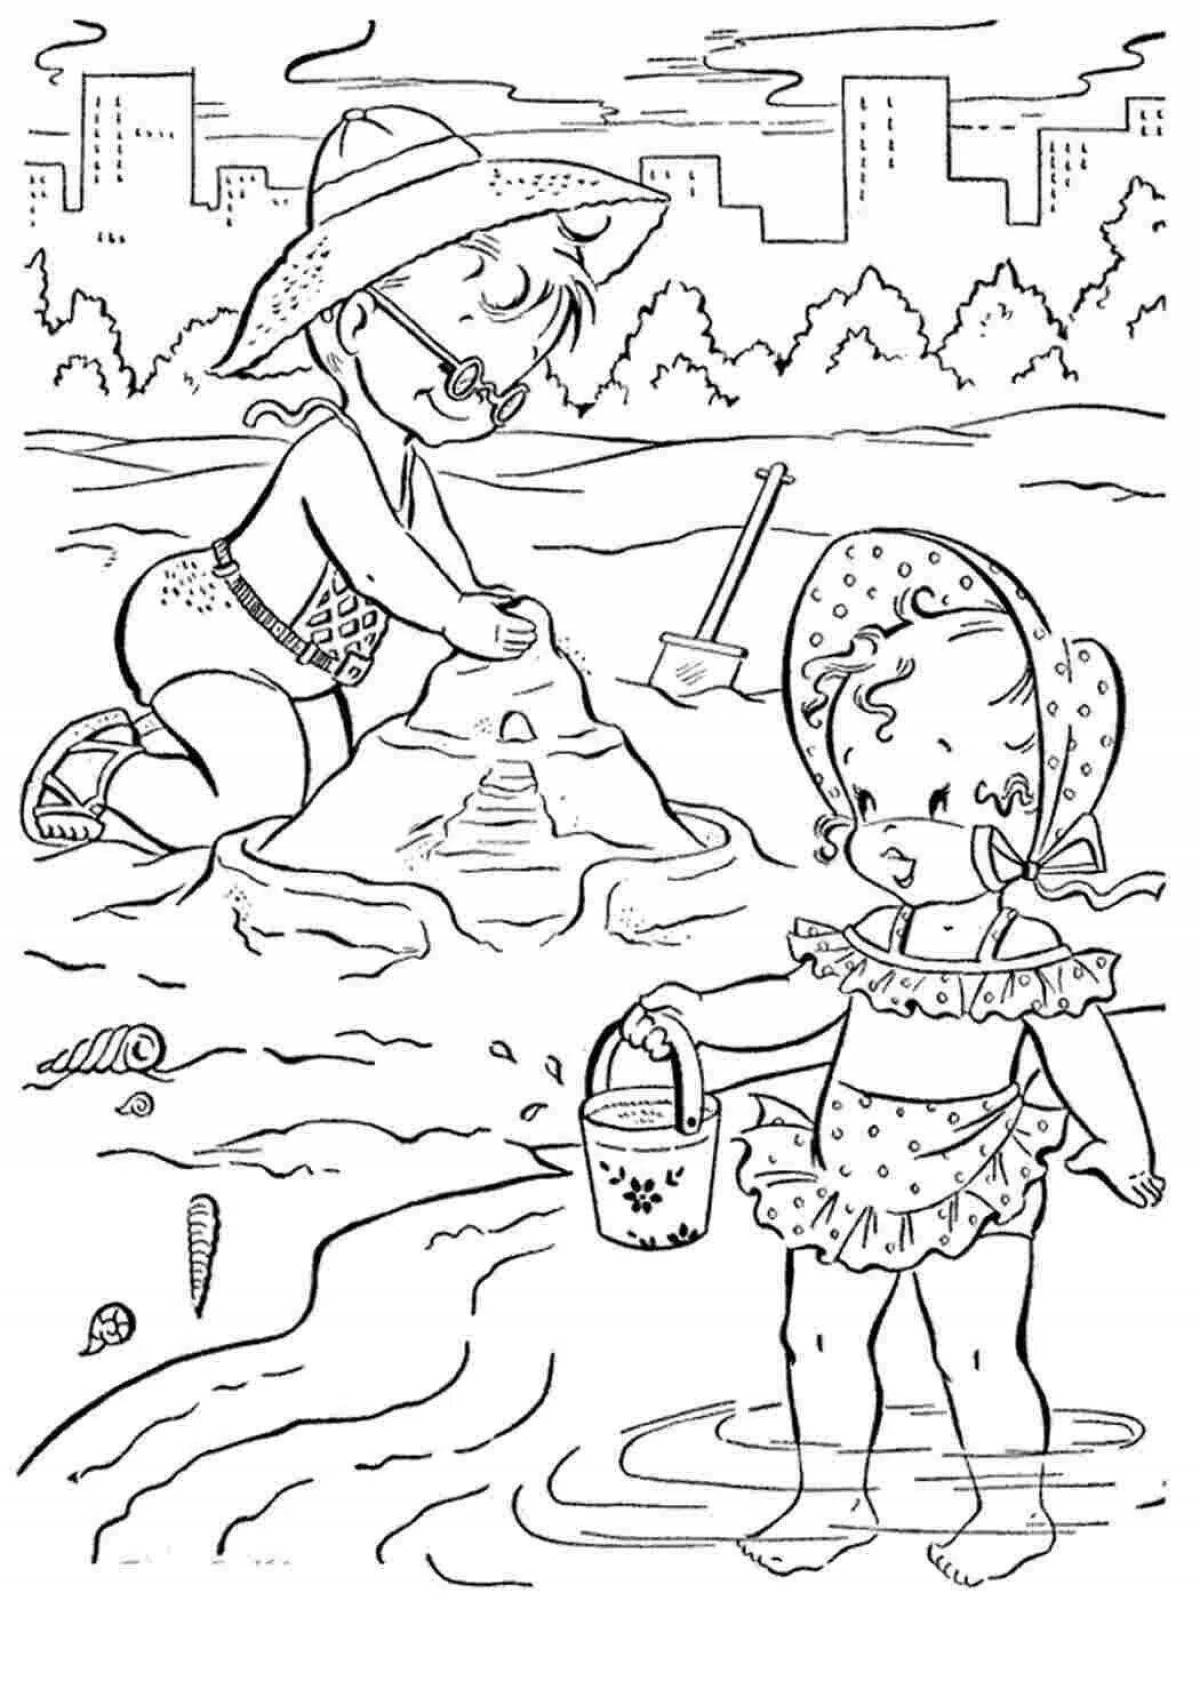 Crazy color sand game coloring pages